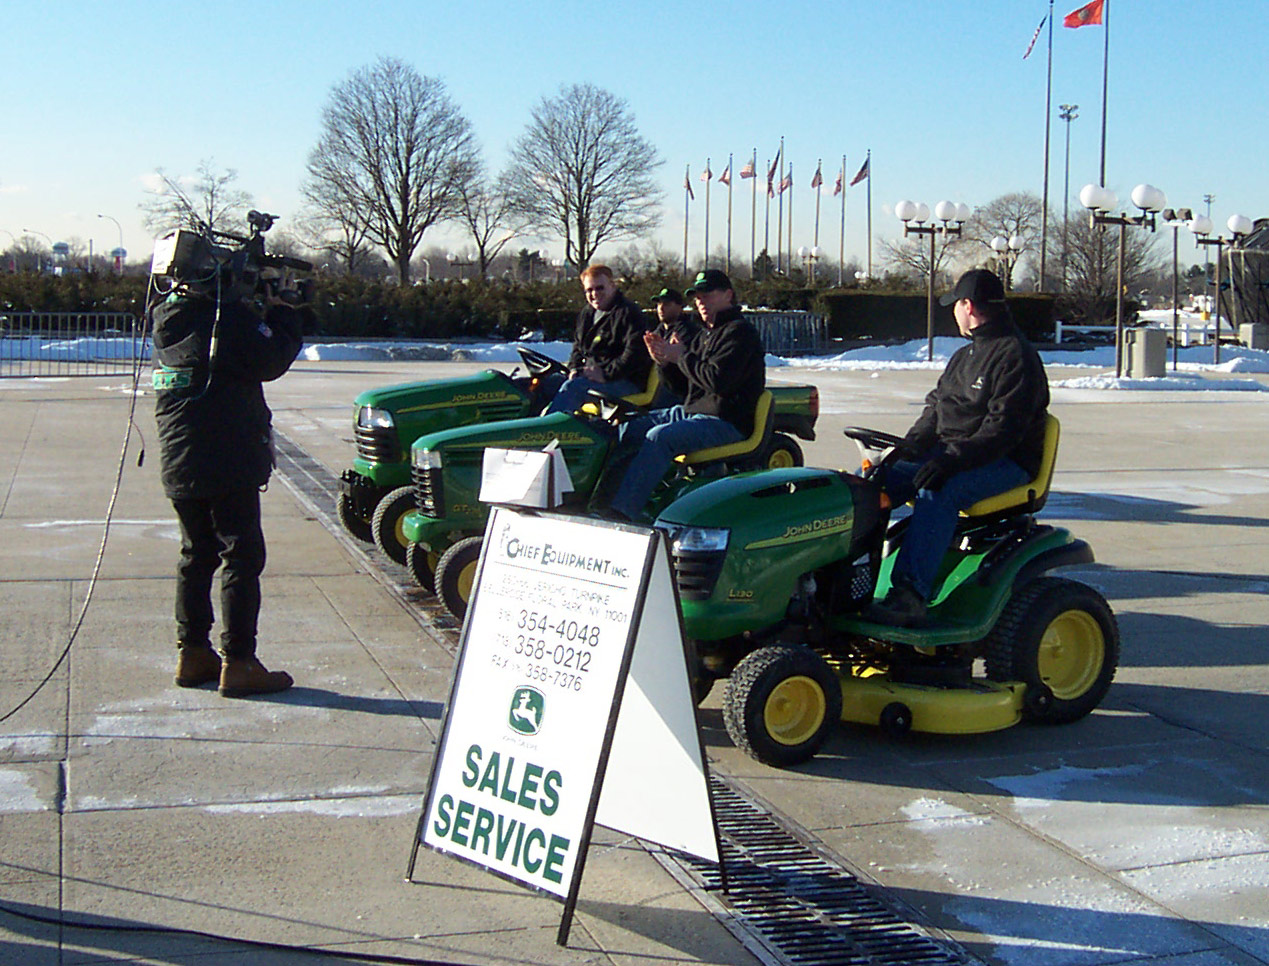 A John Deere vendor during one of the Home Shows at the Nassau Coliseum.